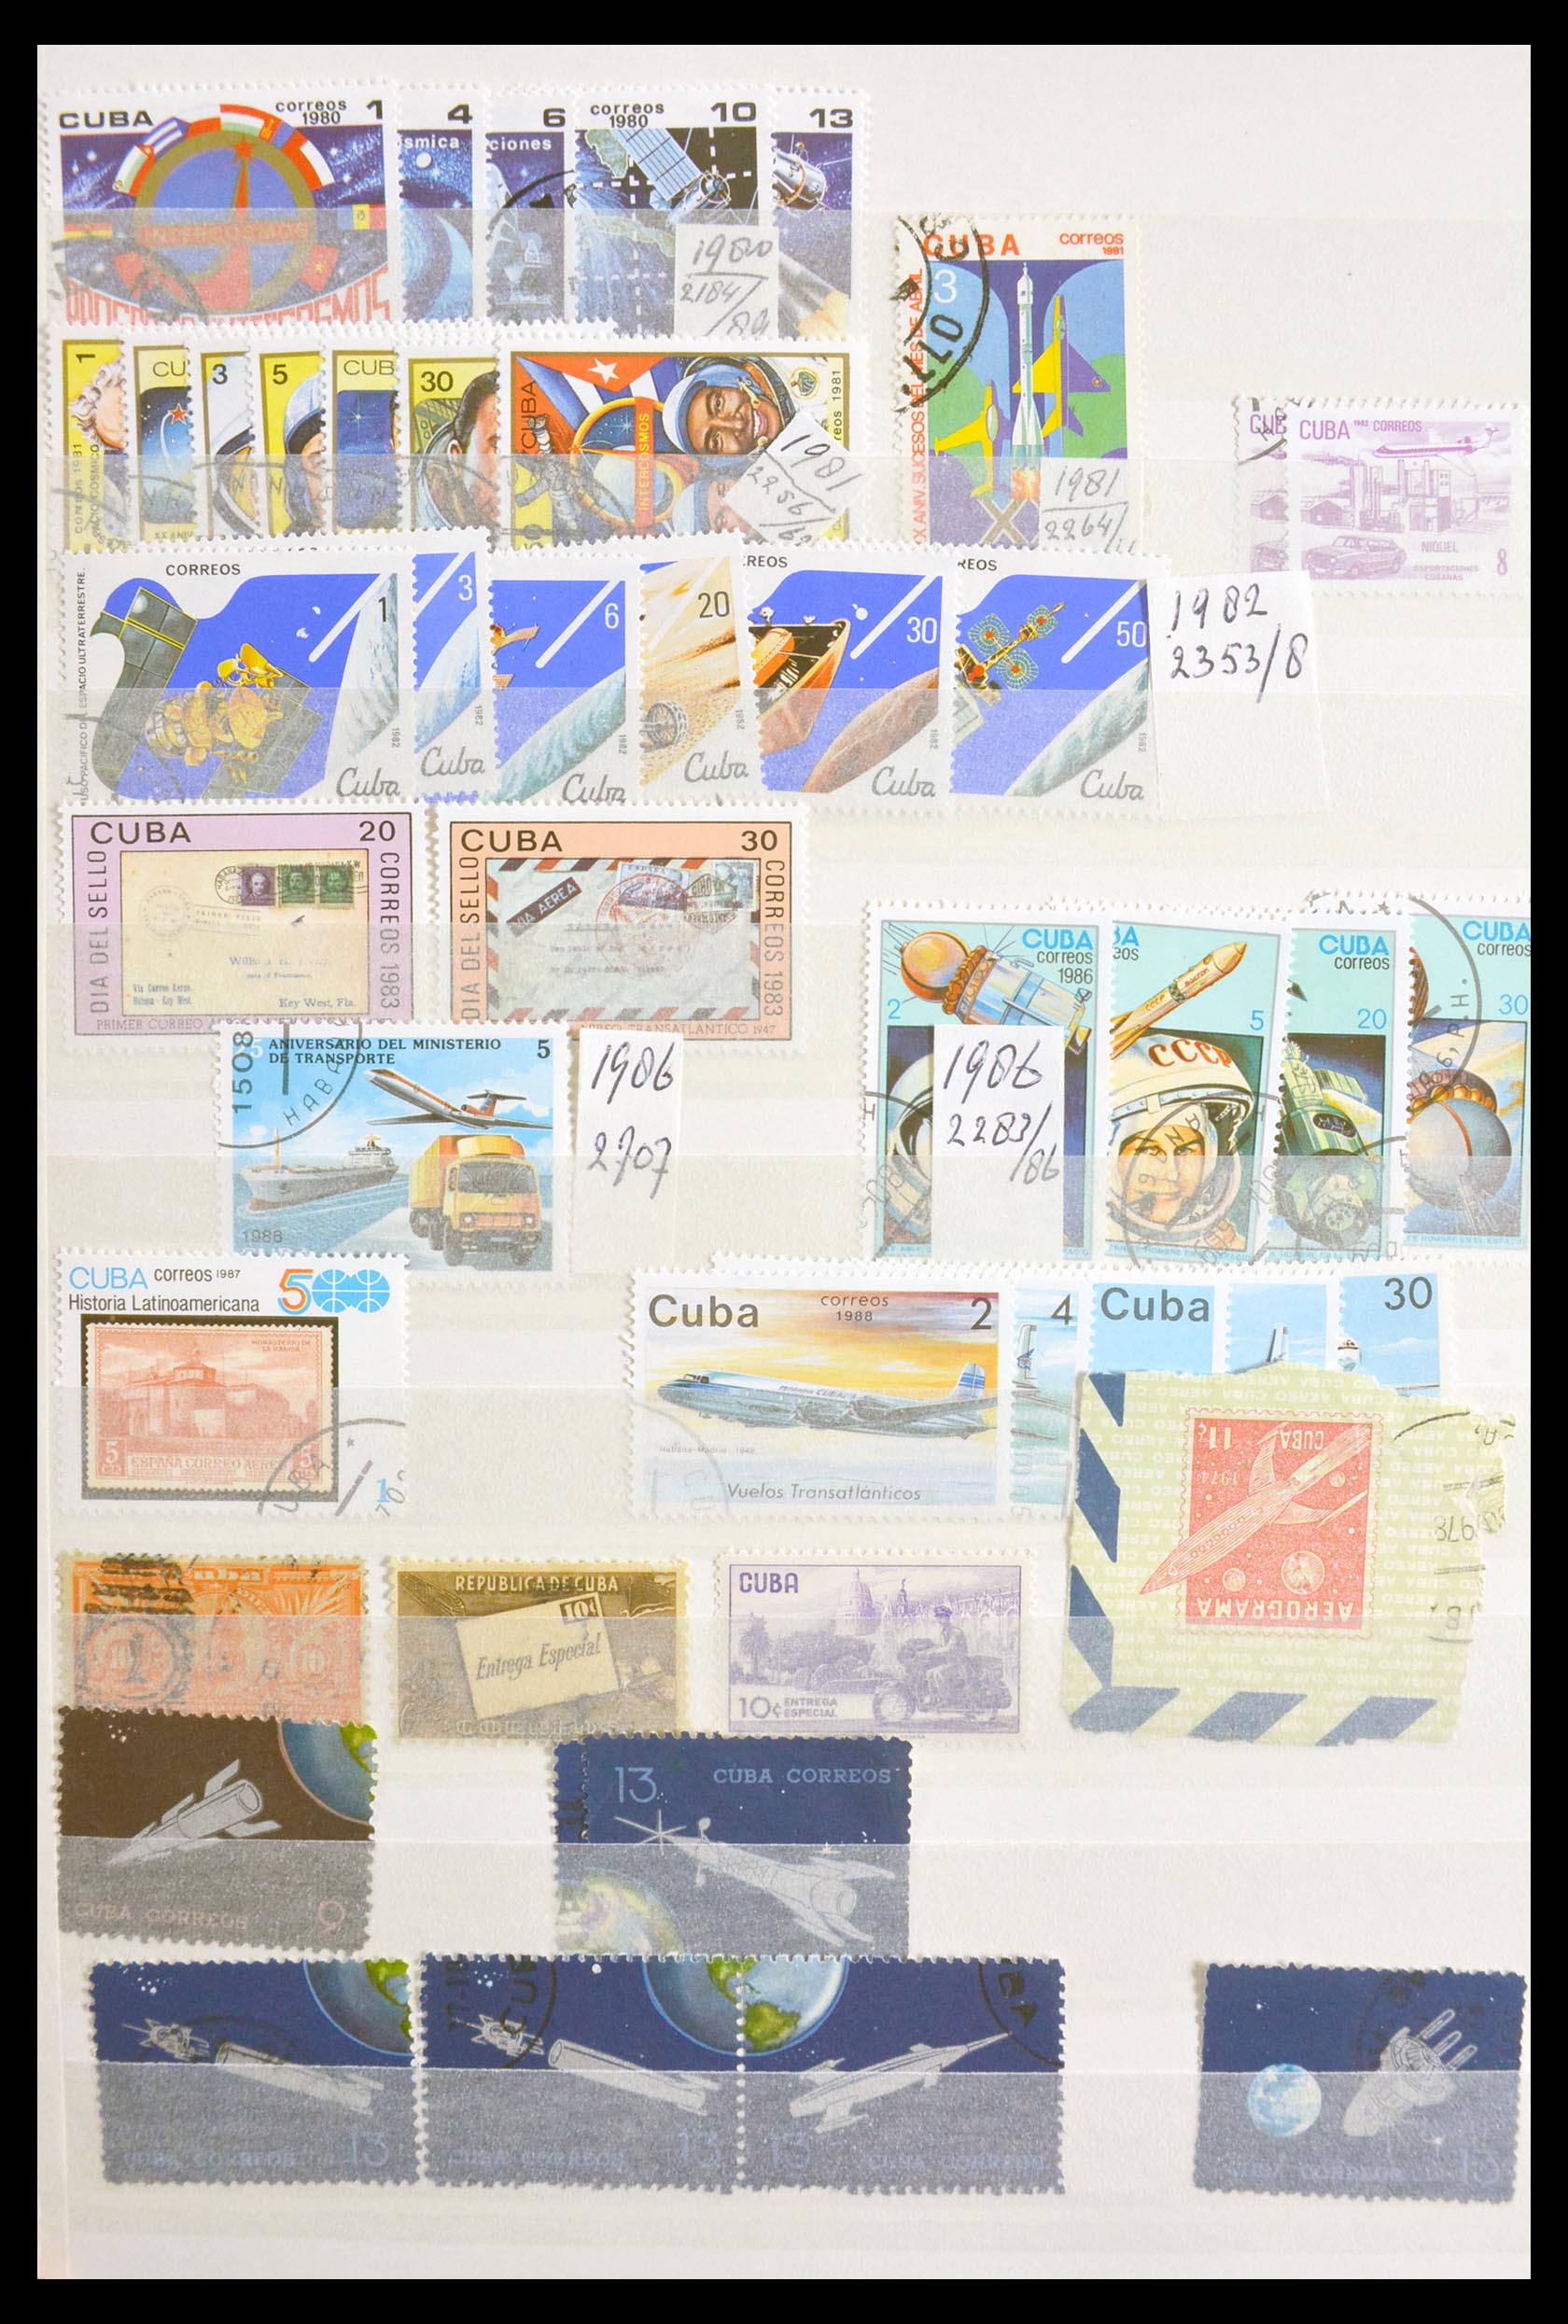 29917 058 - 29917 Latin America airmail stamps.